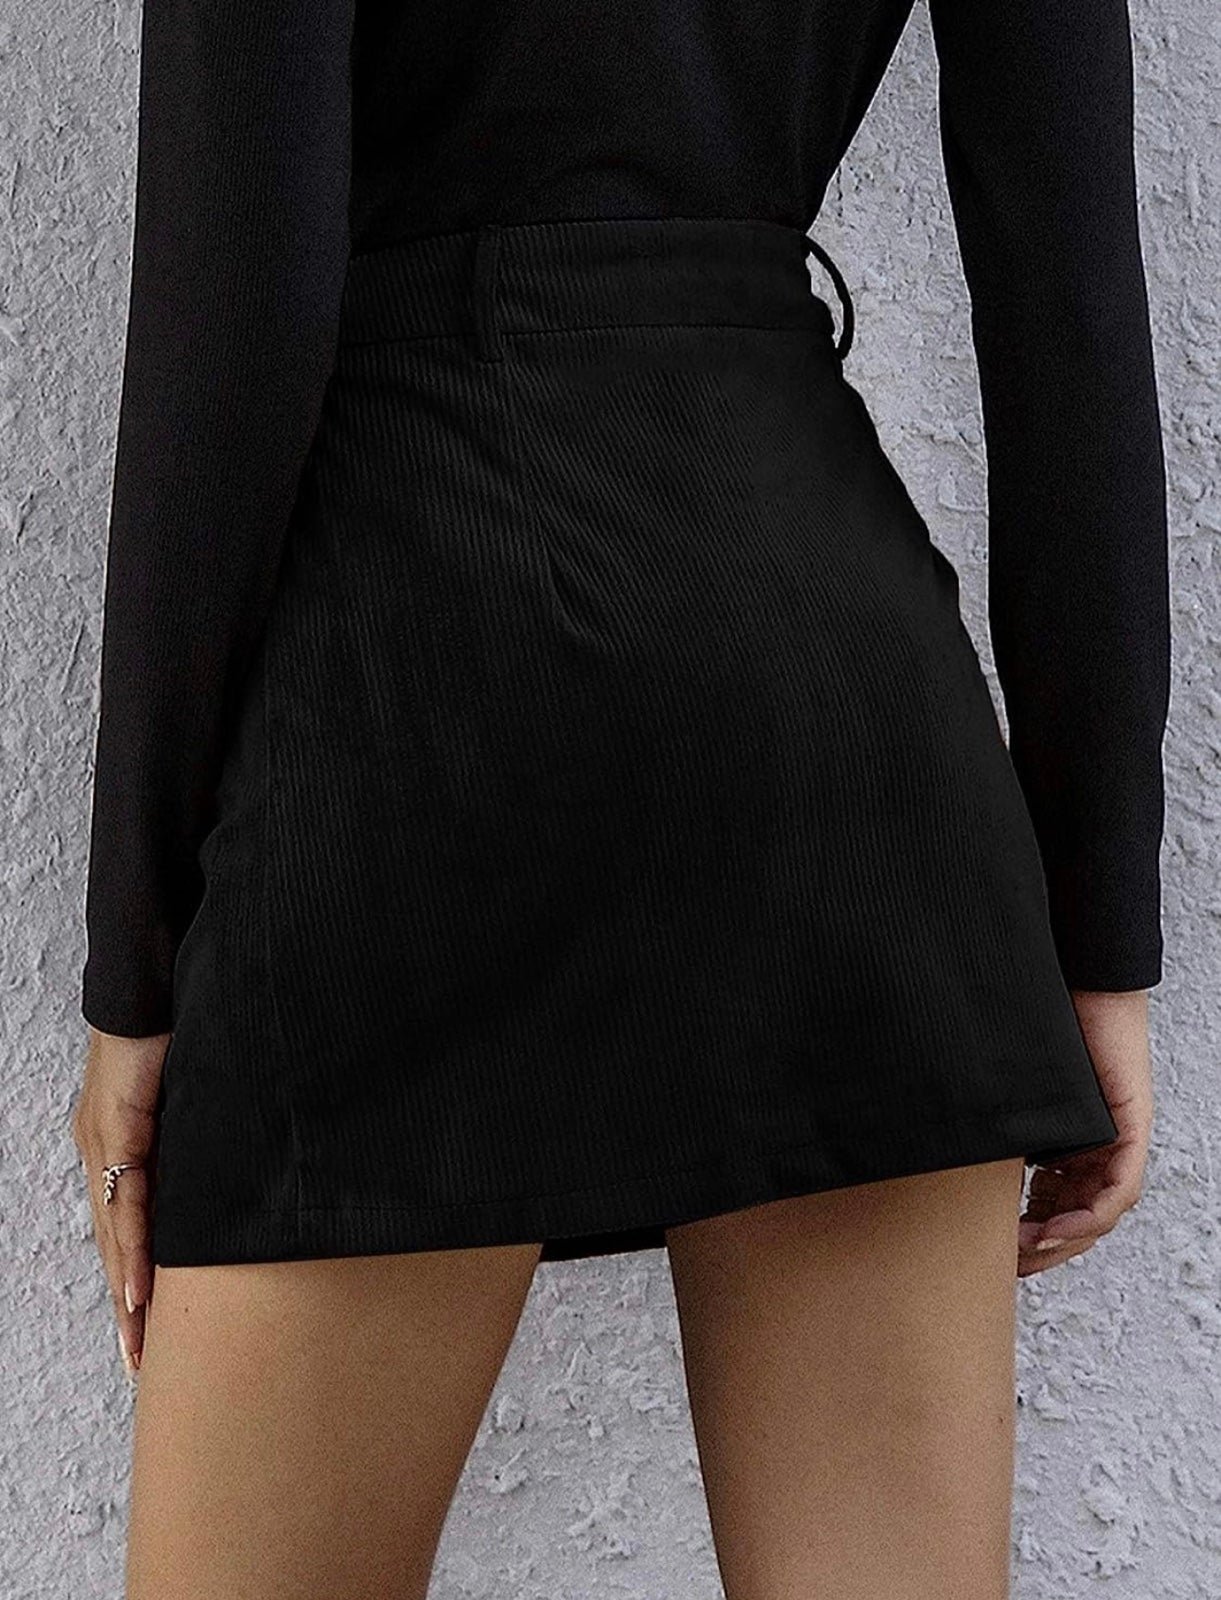 Special offer  Black corduroy skirt - large fHaEQK5fZ Cool